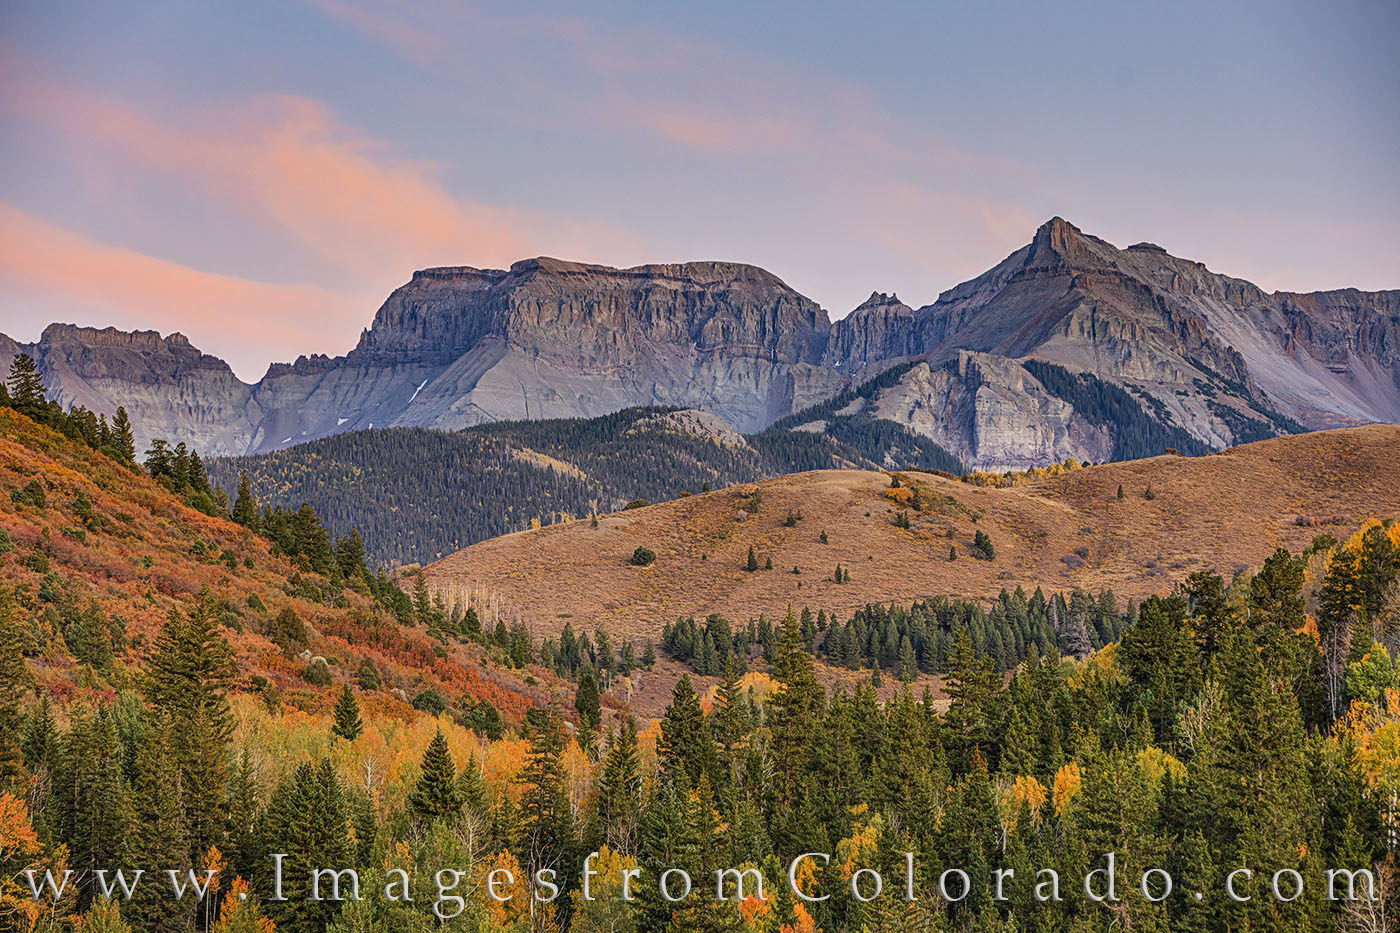 Sunset falls across the Dallas Divide on a cool fall evening in early October. The aspen and scrub showed off oranges and golds...